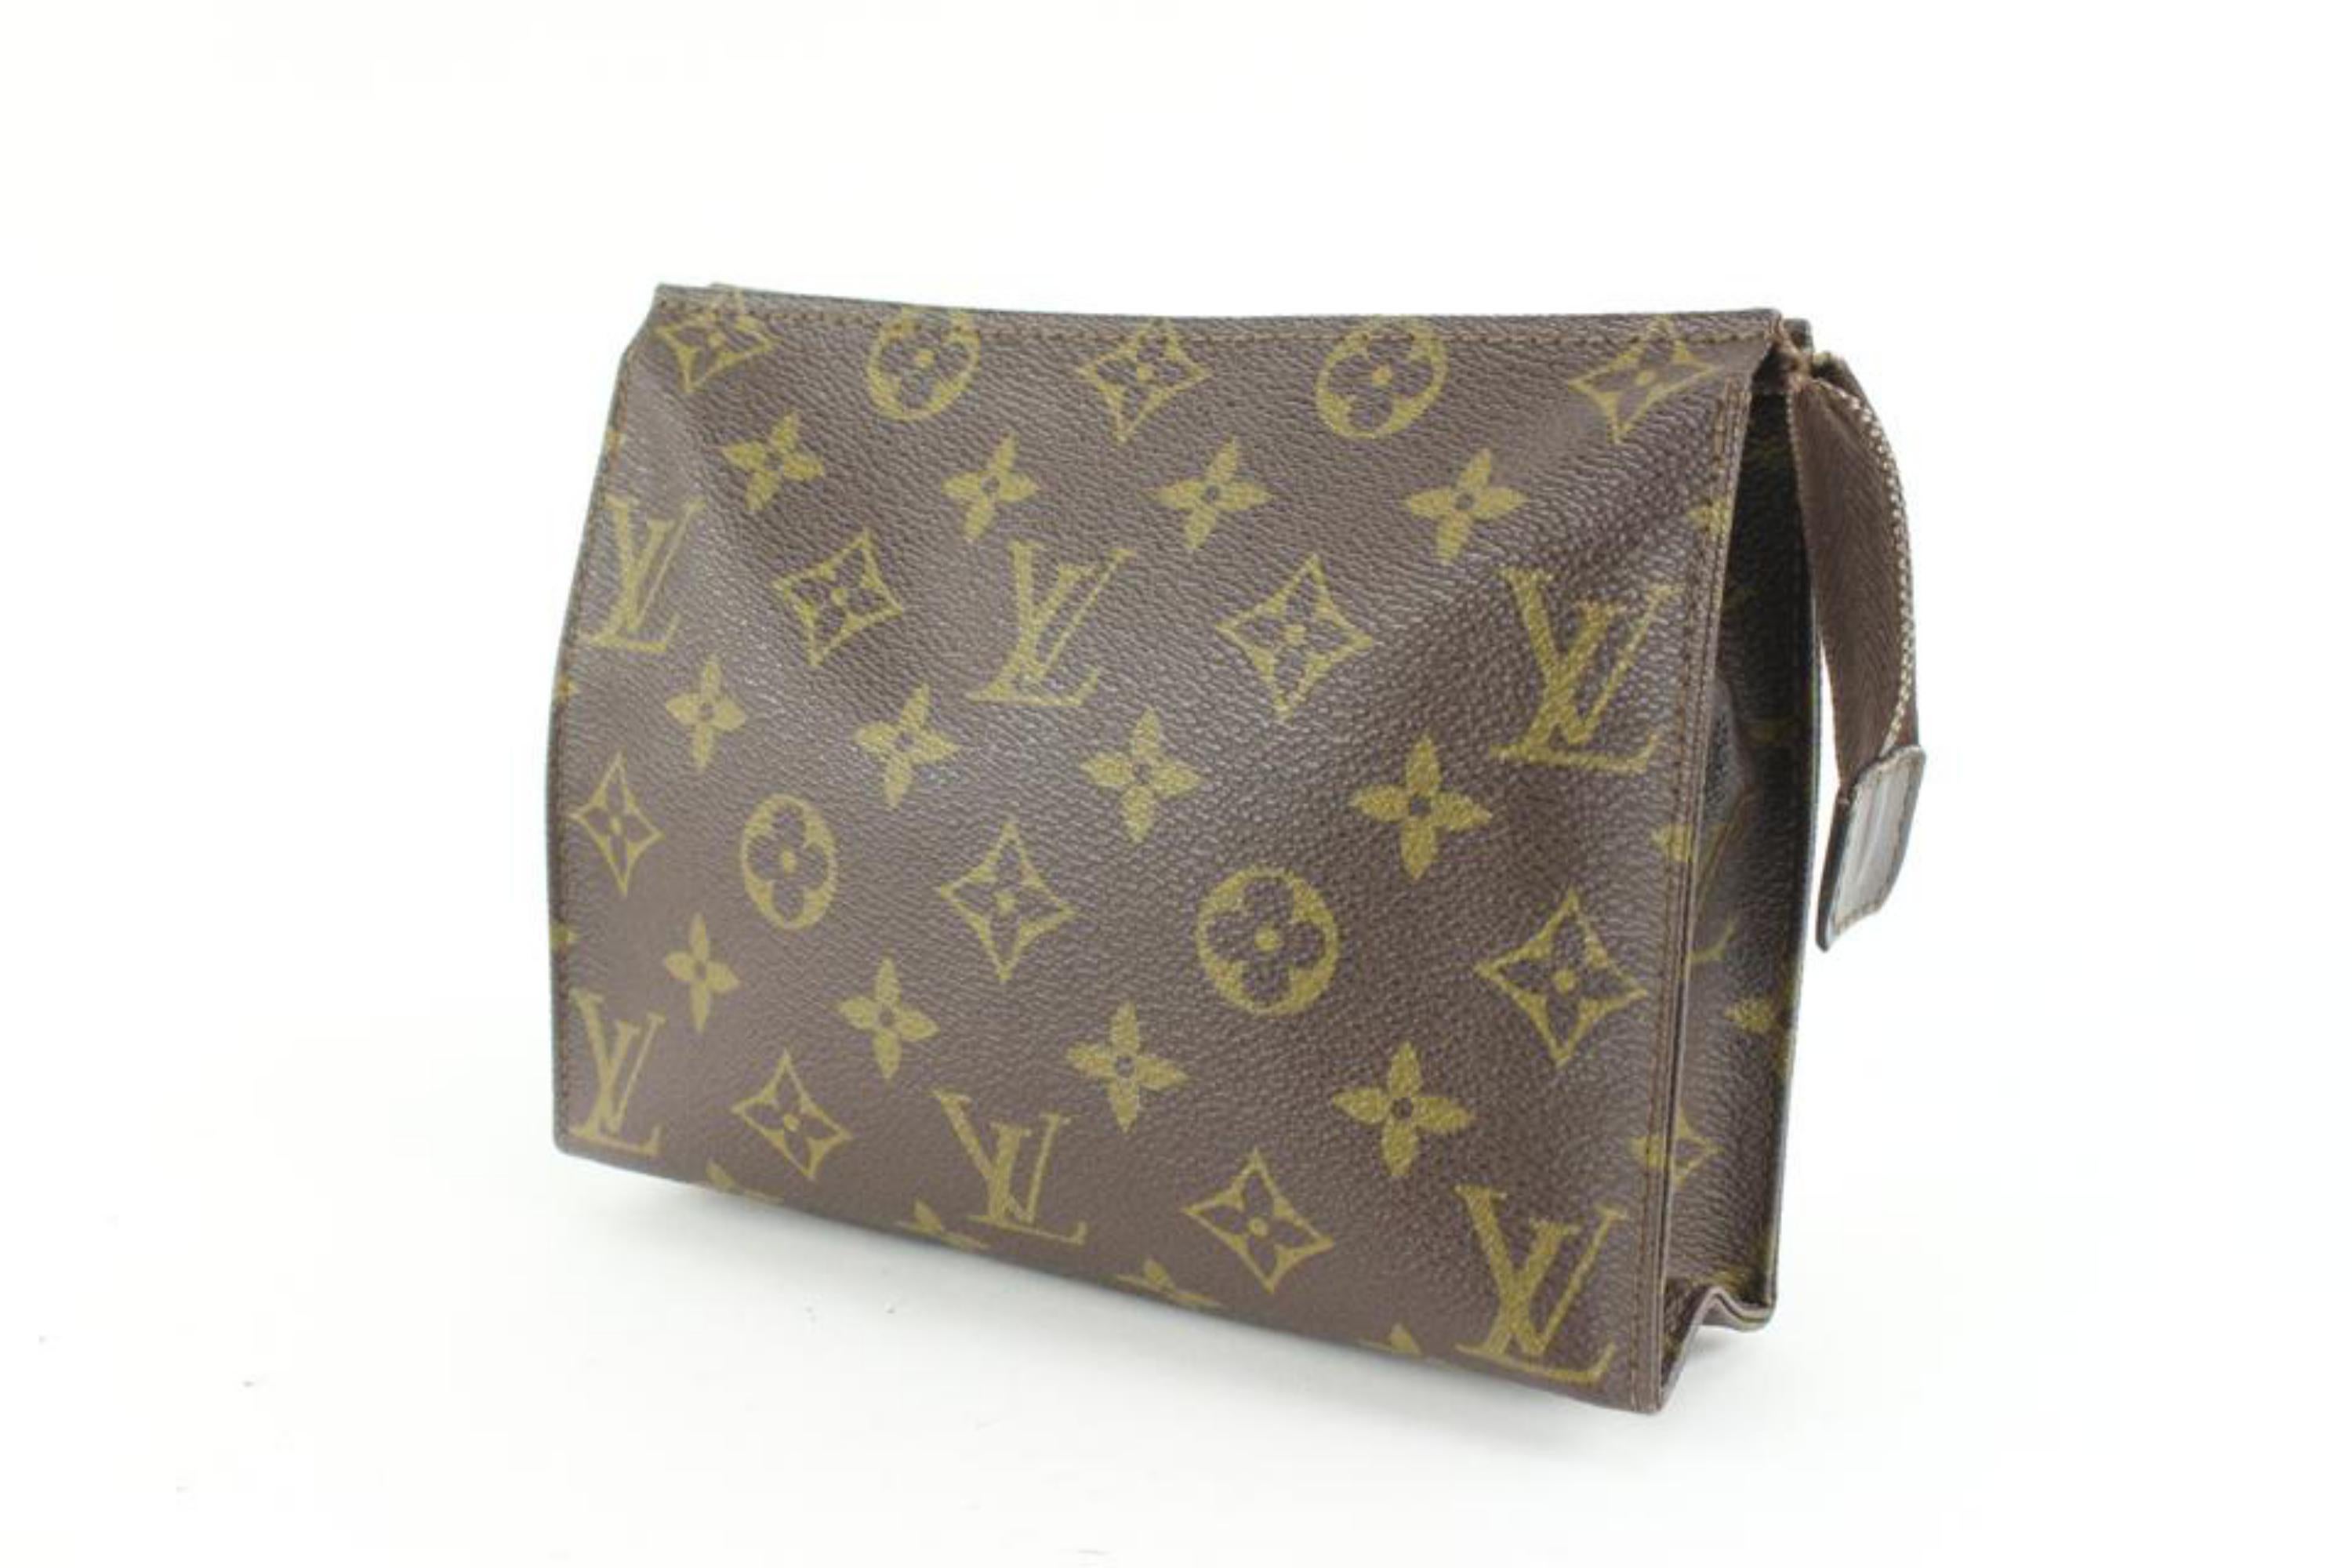 Louis Vuitton Toiletry Pouch 19 - 9 For Sale on 1stDibs